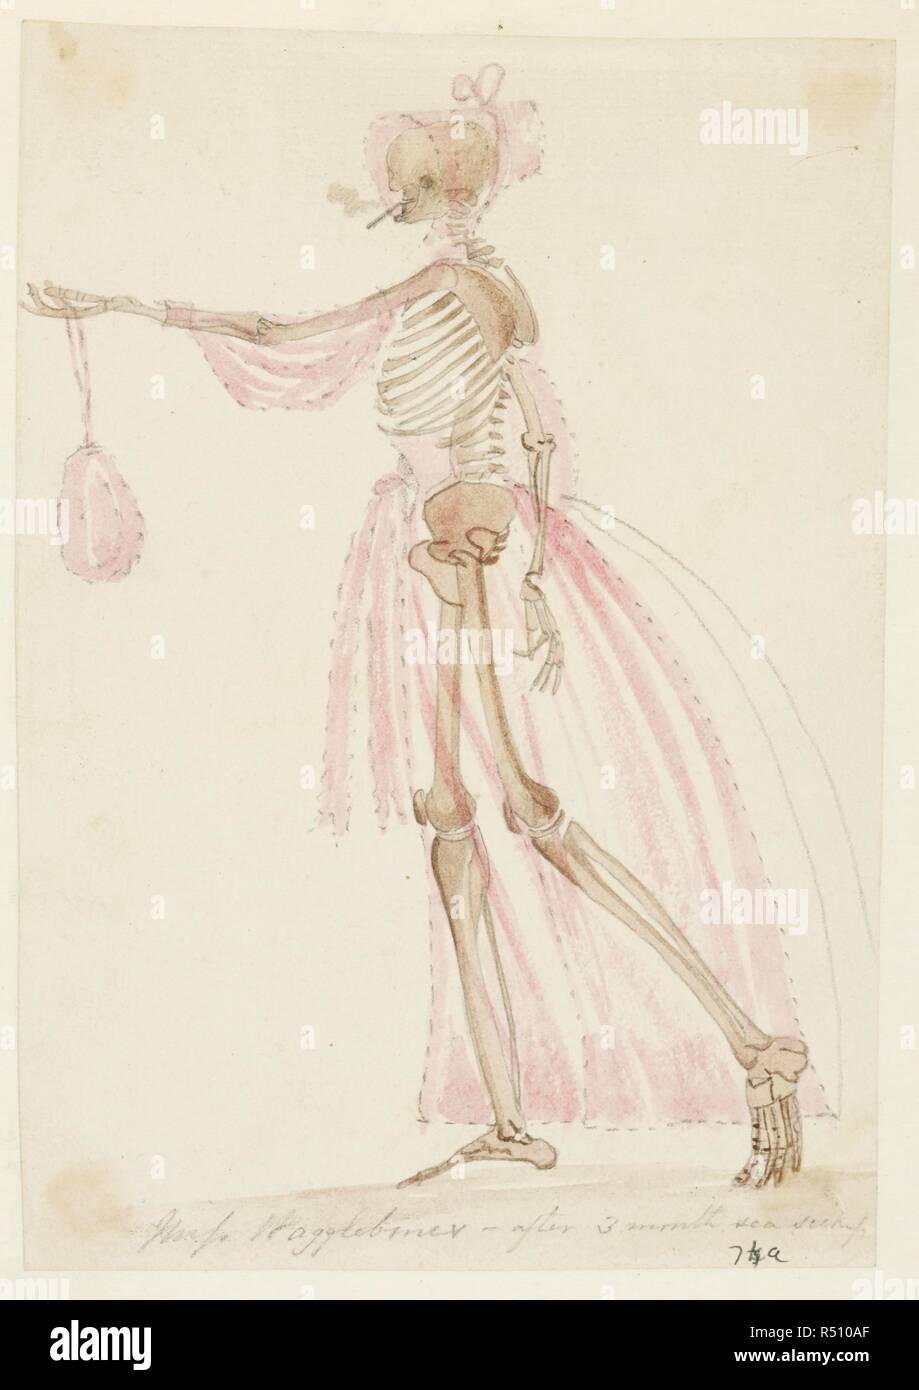 Skeleton in pink dress. â€˜Miss Wagglebones-after 3 monthâ€™s sea-sickness.â€™. Album of 414 drawings and scraps, and 9 prints of landscapes, architecture, natural history, and people, including Indian costumes and military uniforms. 1822 - 1856. Pencil, pen-and-ink, watercolour. Source: WD 1478 page 74a. Author: Bellasis, John Brownrigg. Stock Photo